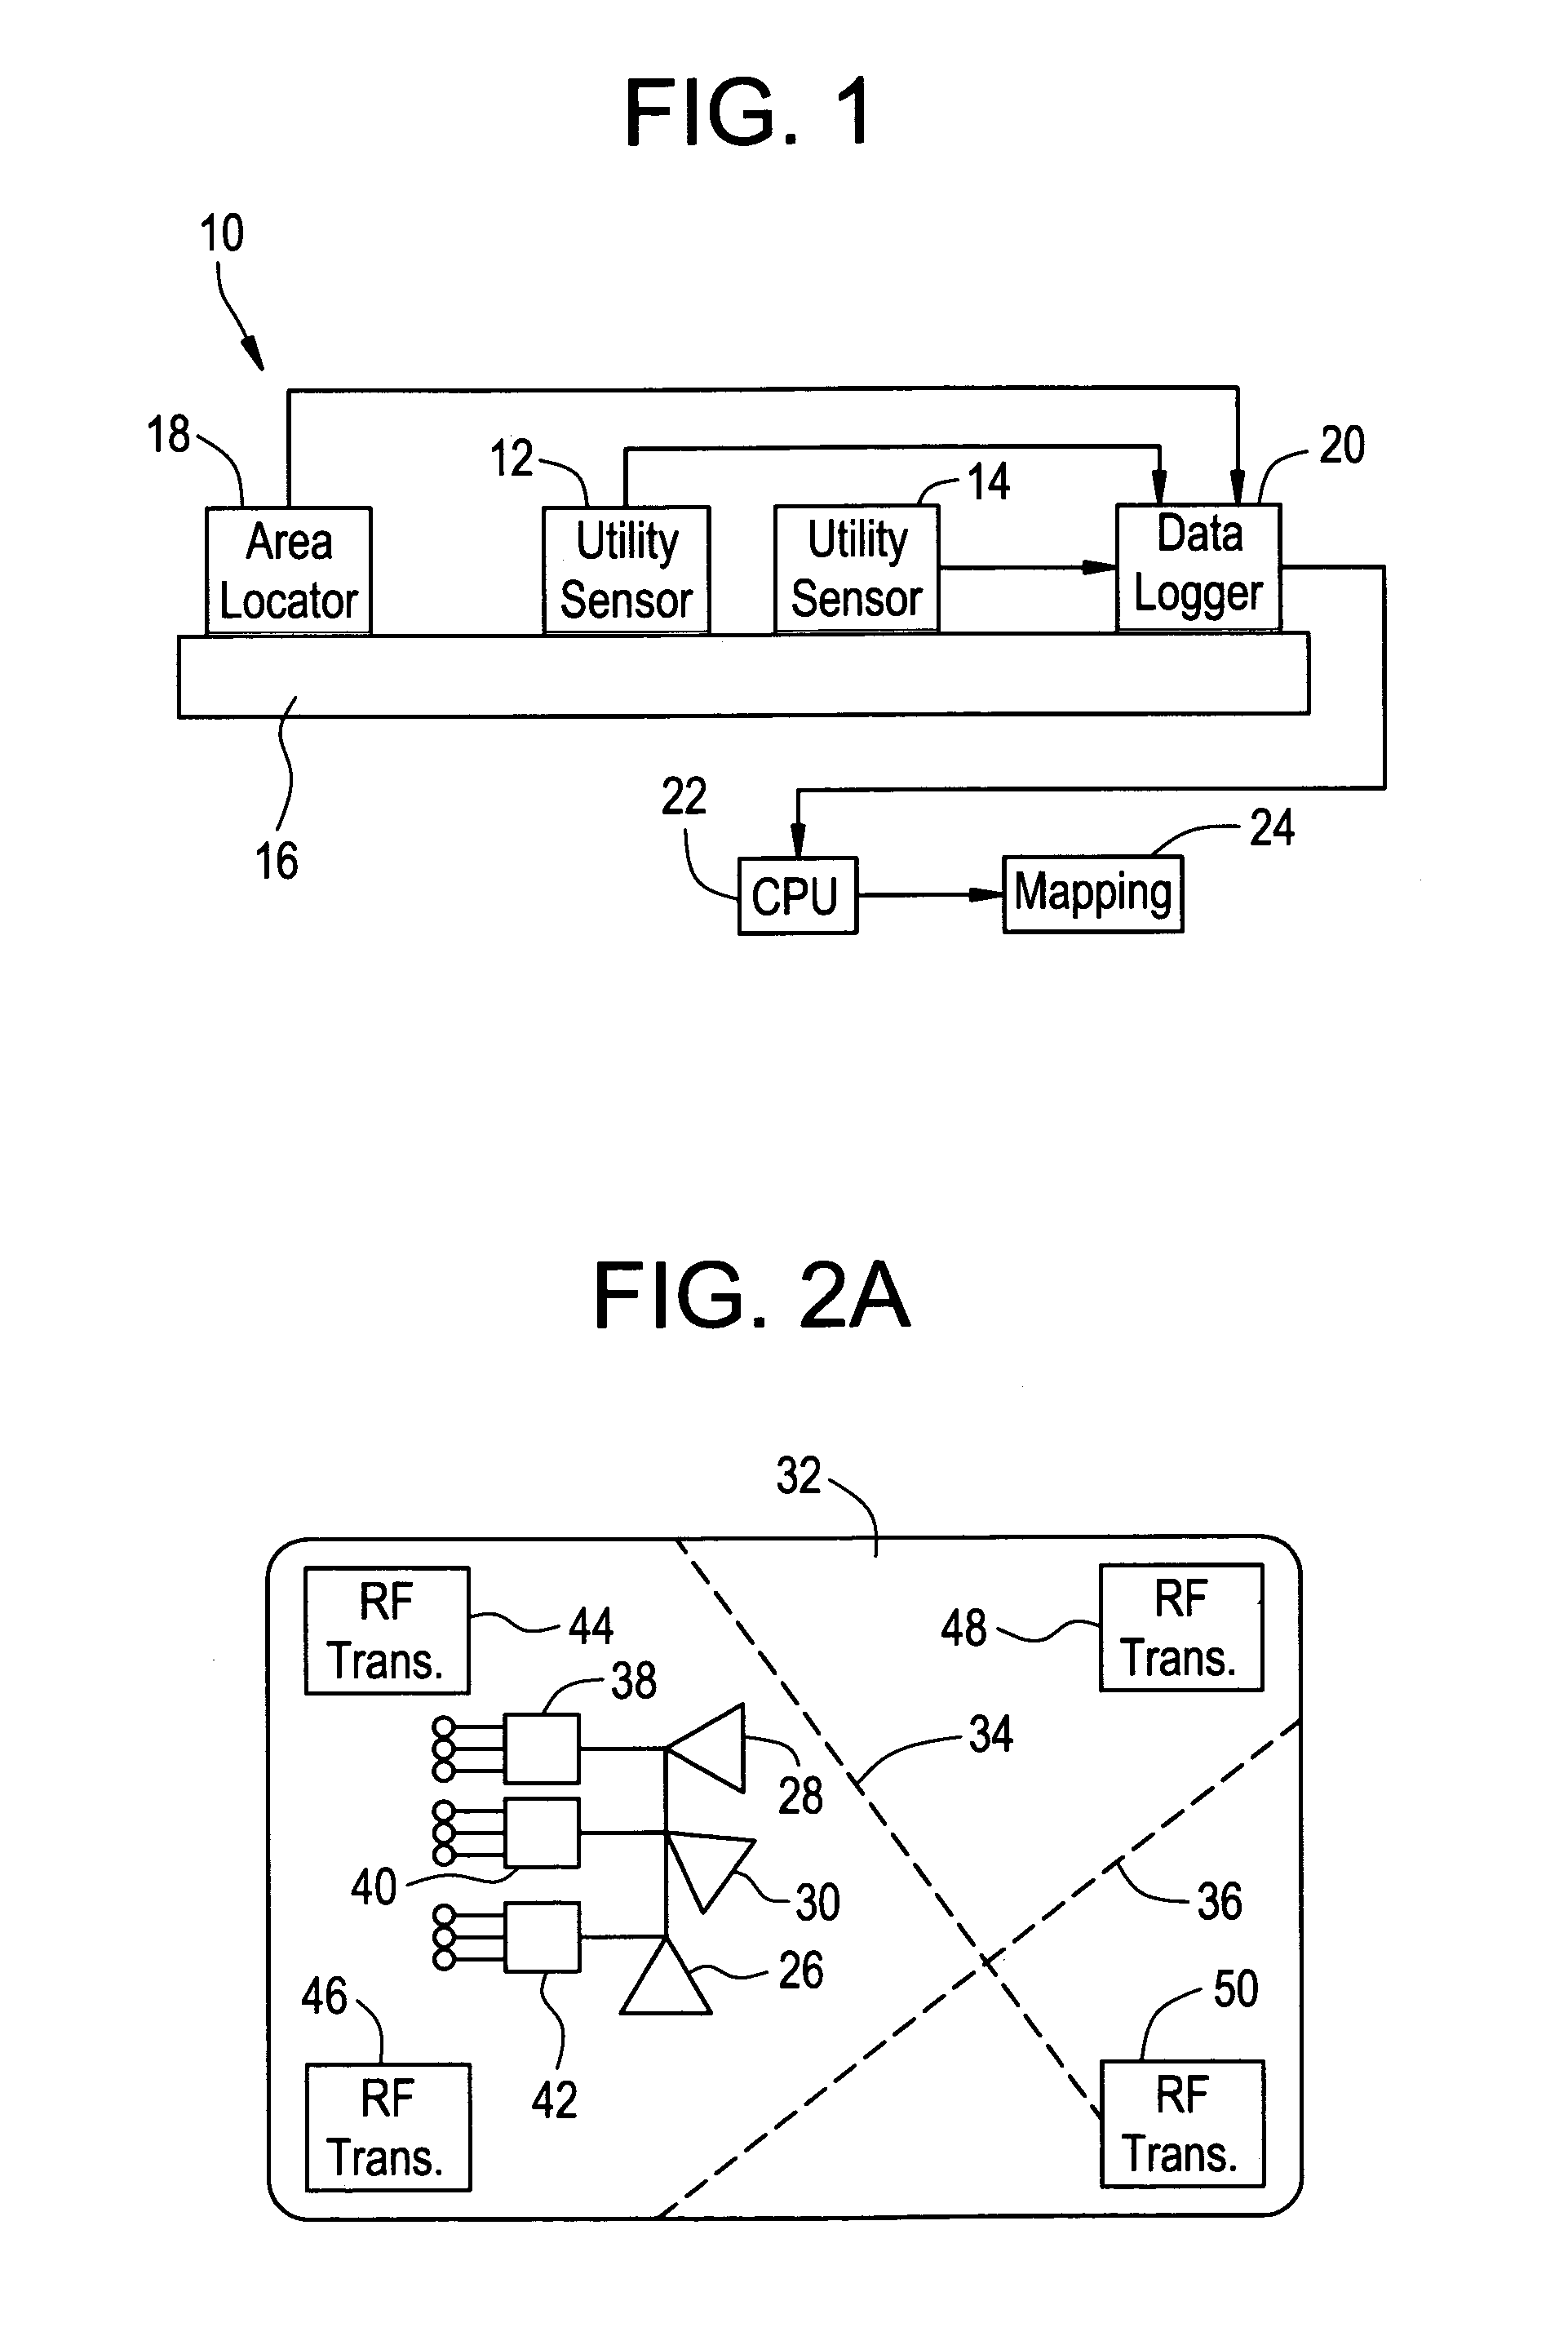 Method and apparatus for detecting, mapping and locating underground utilities